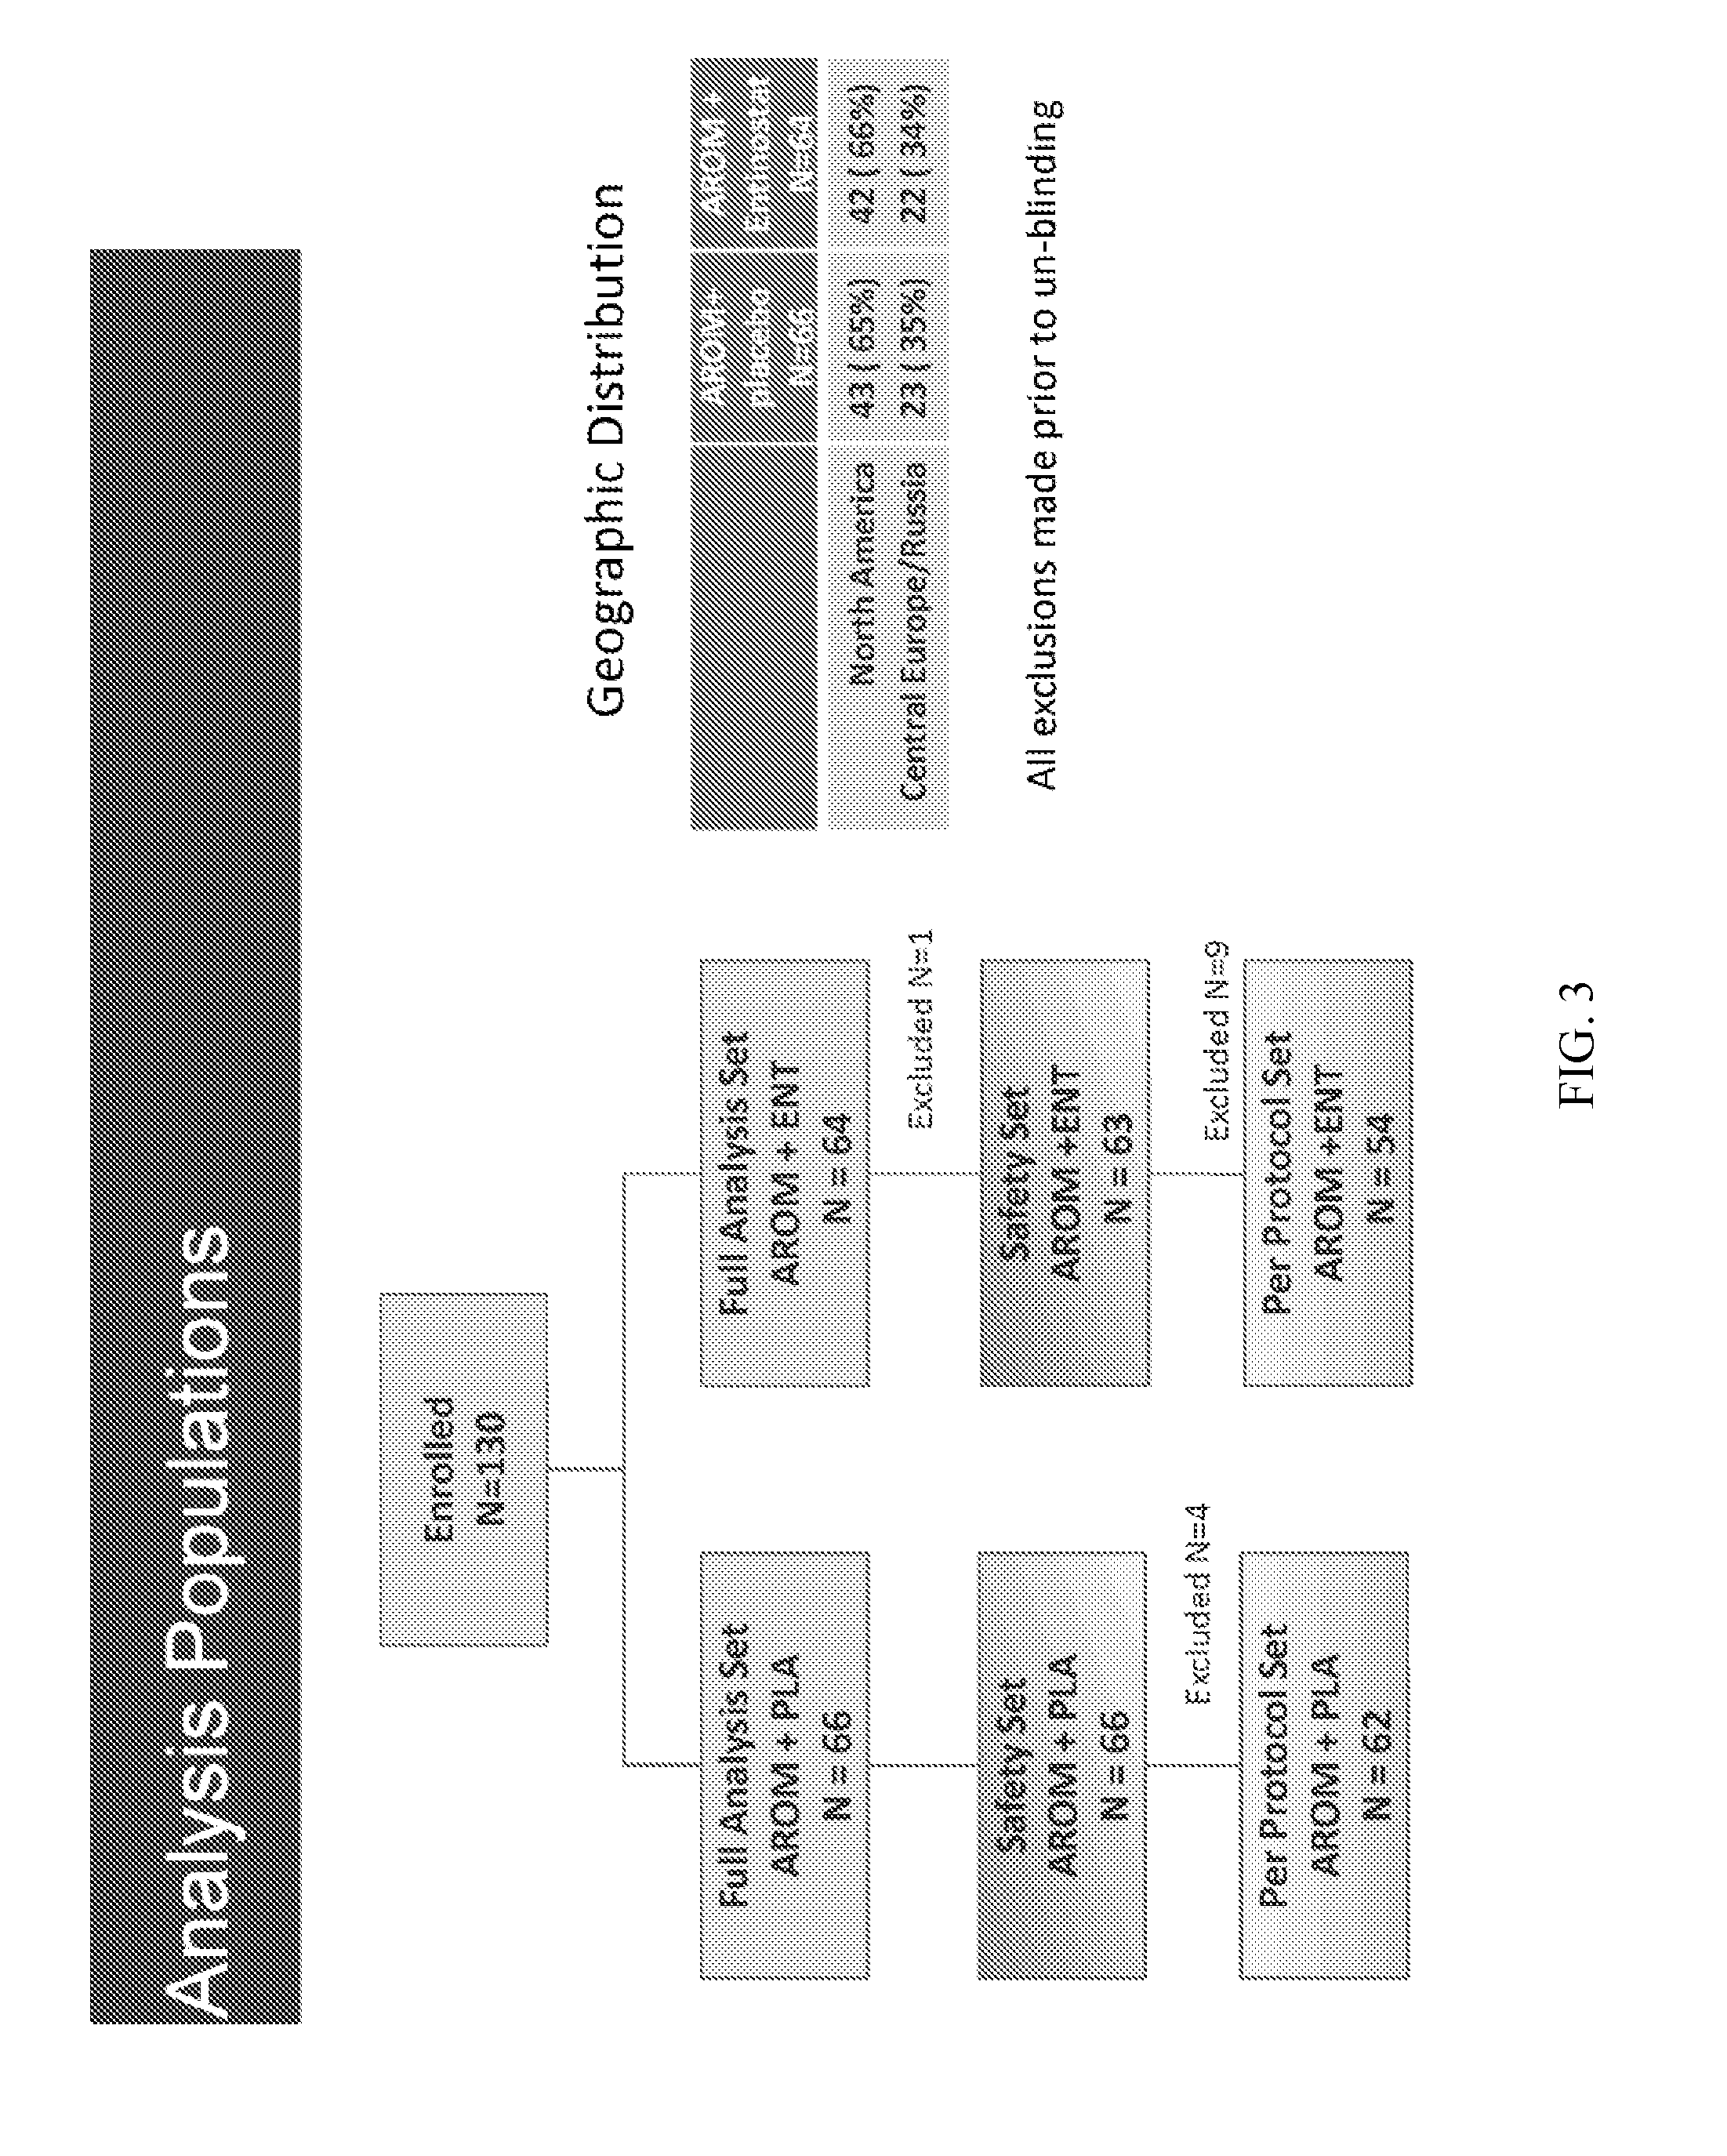 Methods for the treatment of breast cancer